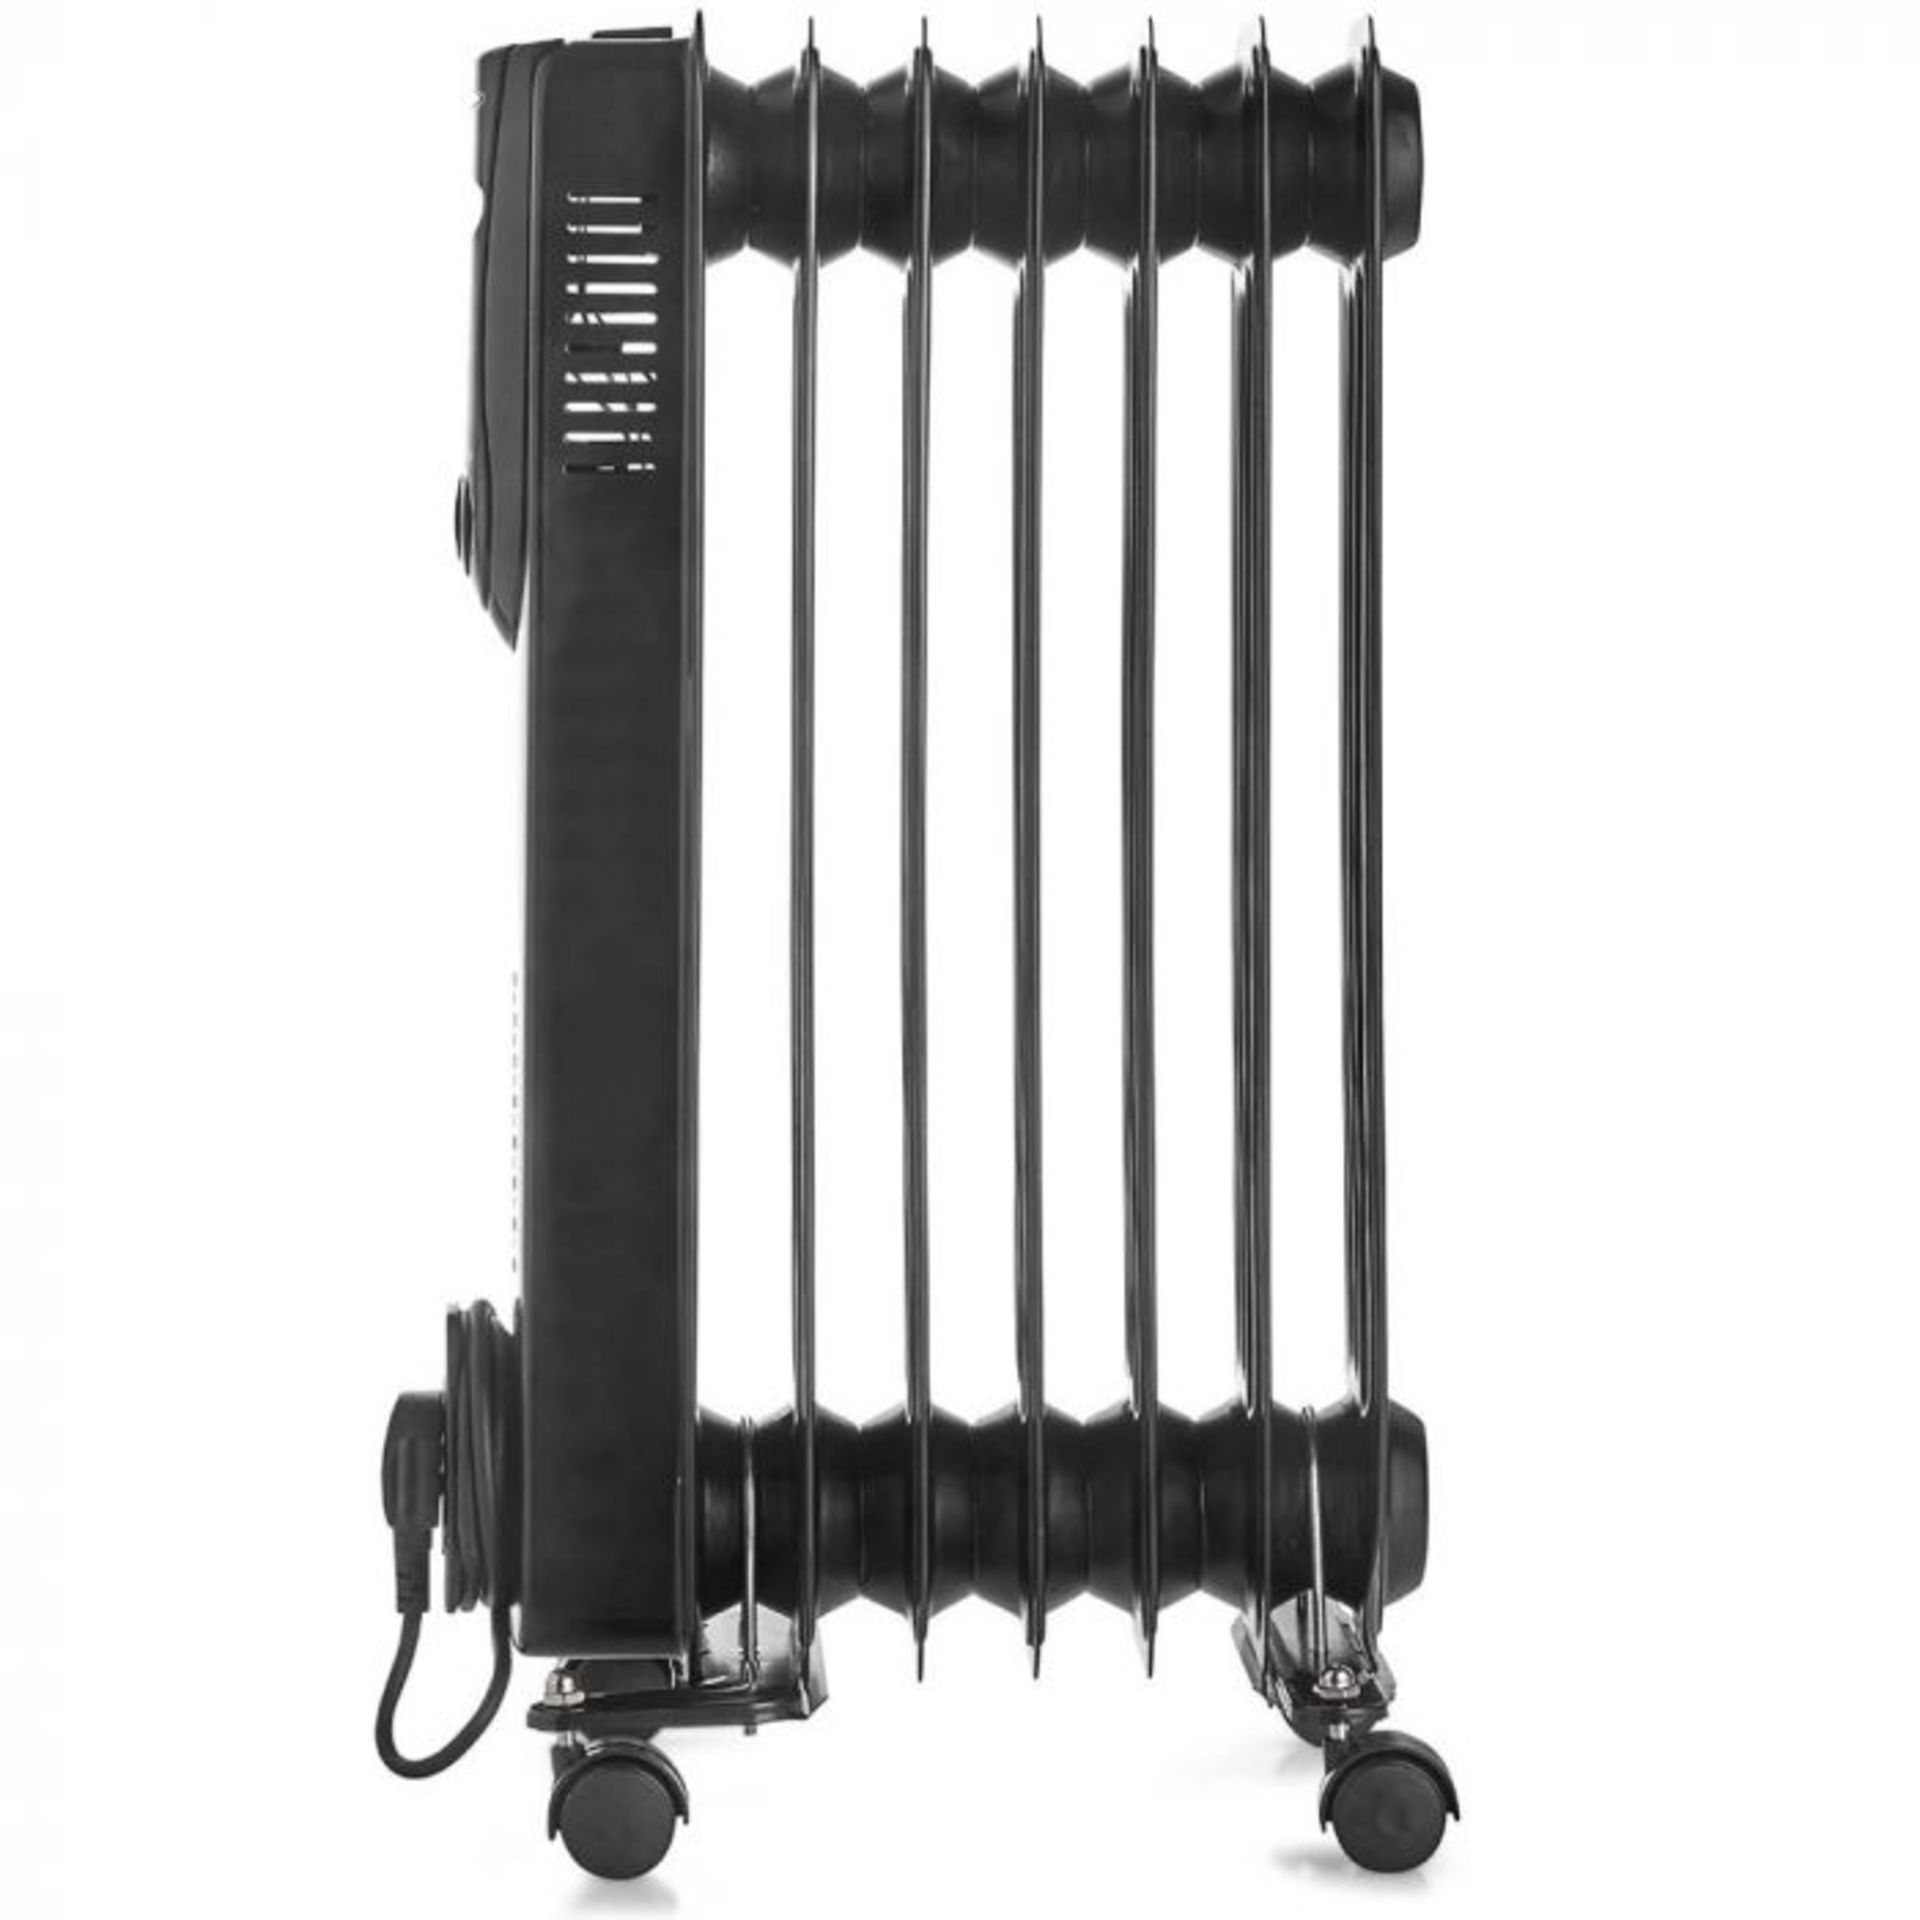 (V130) 7 Fin 1500W Oil Filled Radiator - Black Powerful 1500W radiator with 7 oil-filled fins ... - Image 3 of 3